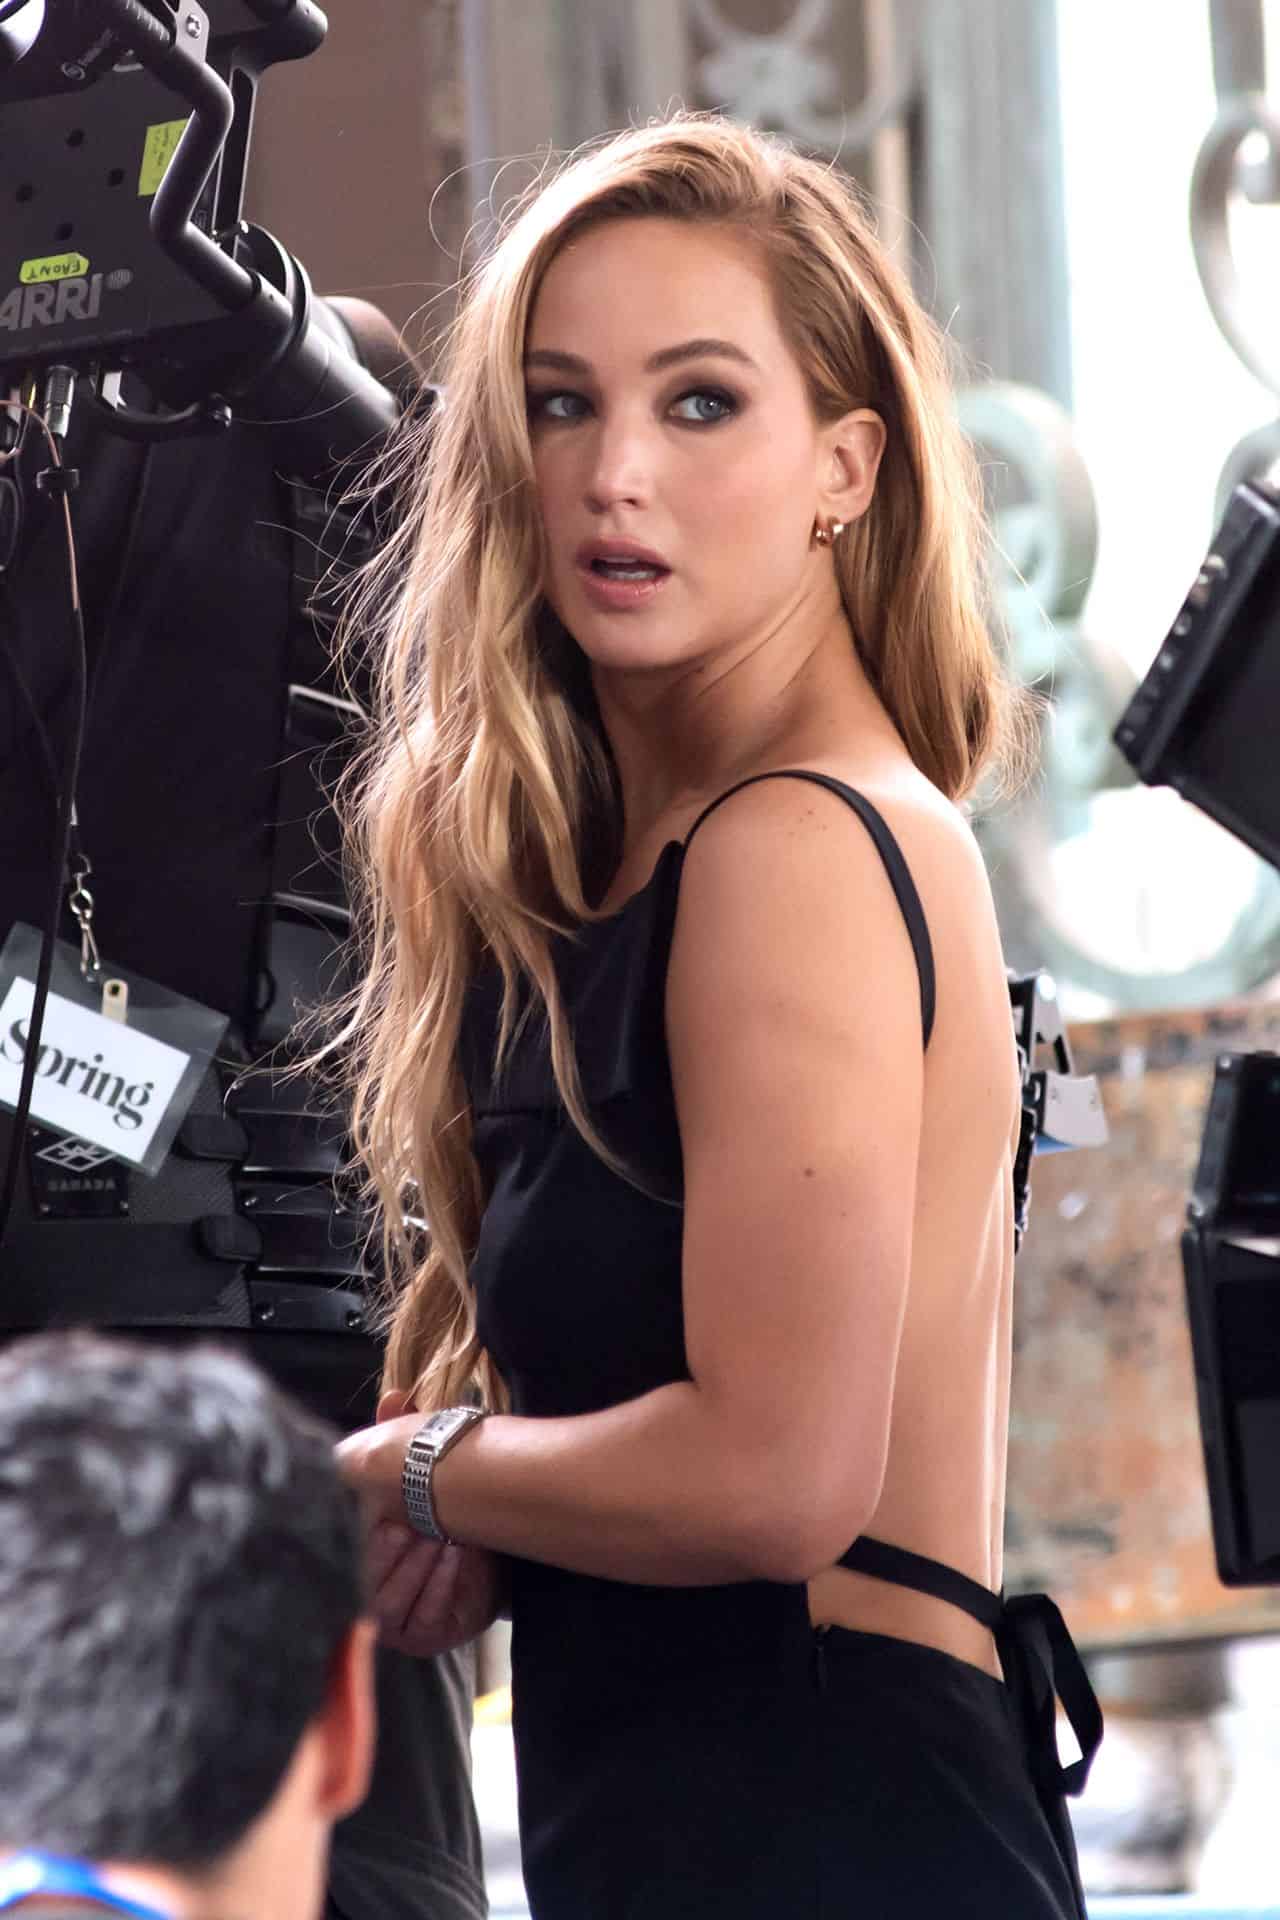 Jennifer Lawrence Stuns in Black Silk Dress in Dior Commercial Shoot in NYC